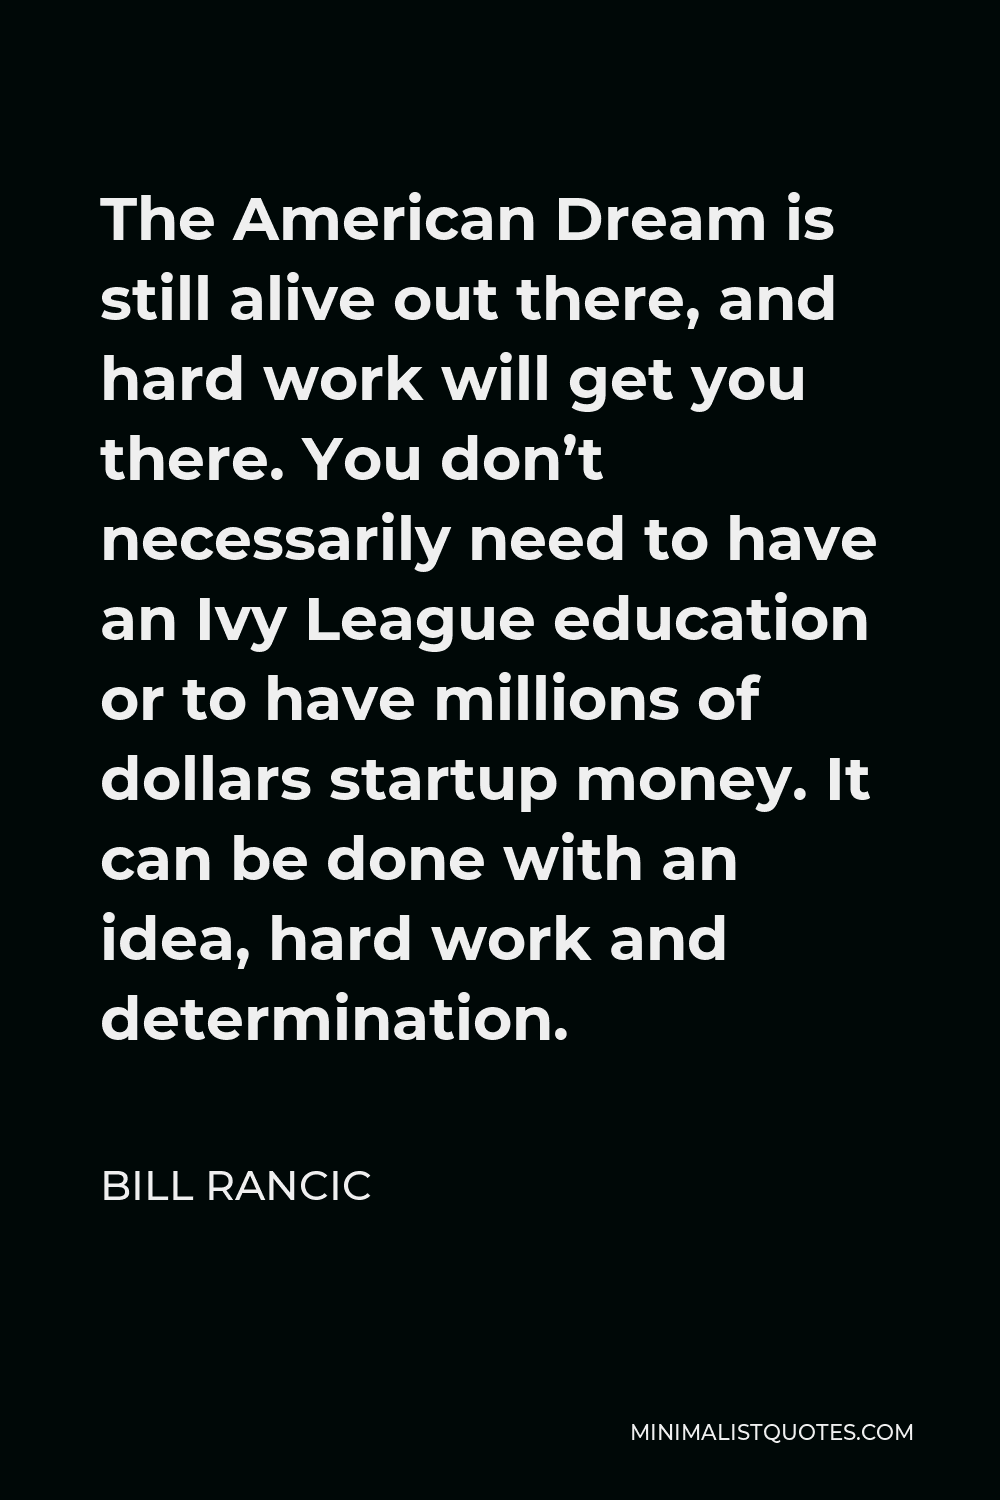 Bill Rancic Quote - The American Dream is still alive out there, and hard work will get you there. You don’t necessarily need to have an Ivy League education or to have millions of dollars startup money. It can be done with an idea, hard work and determination.